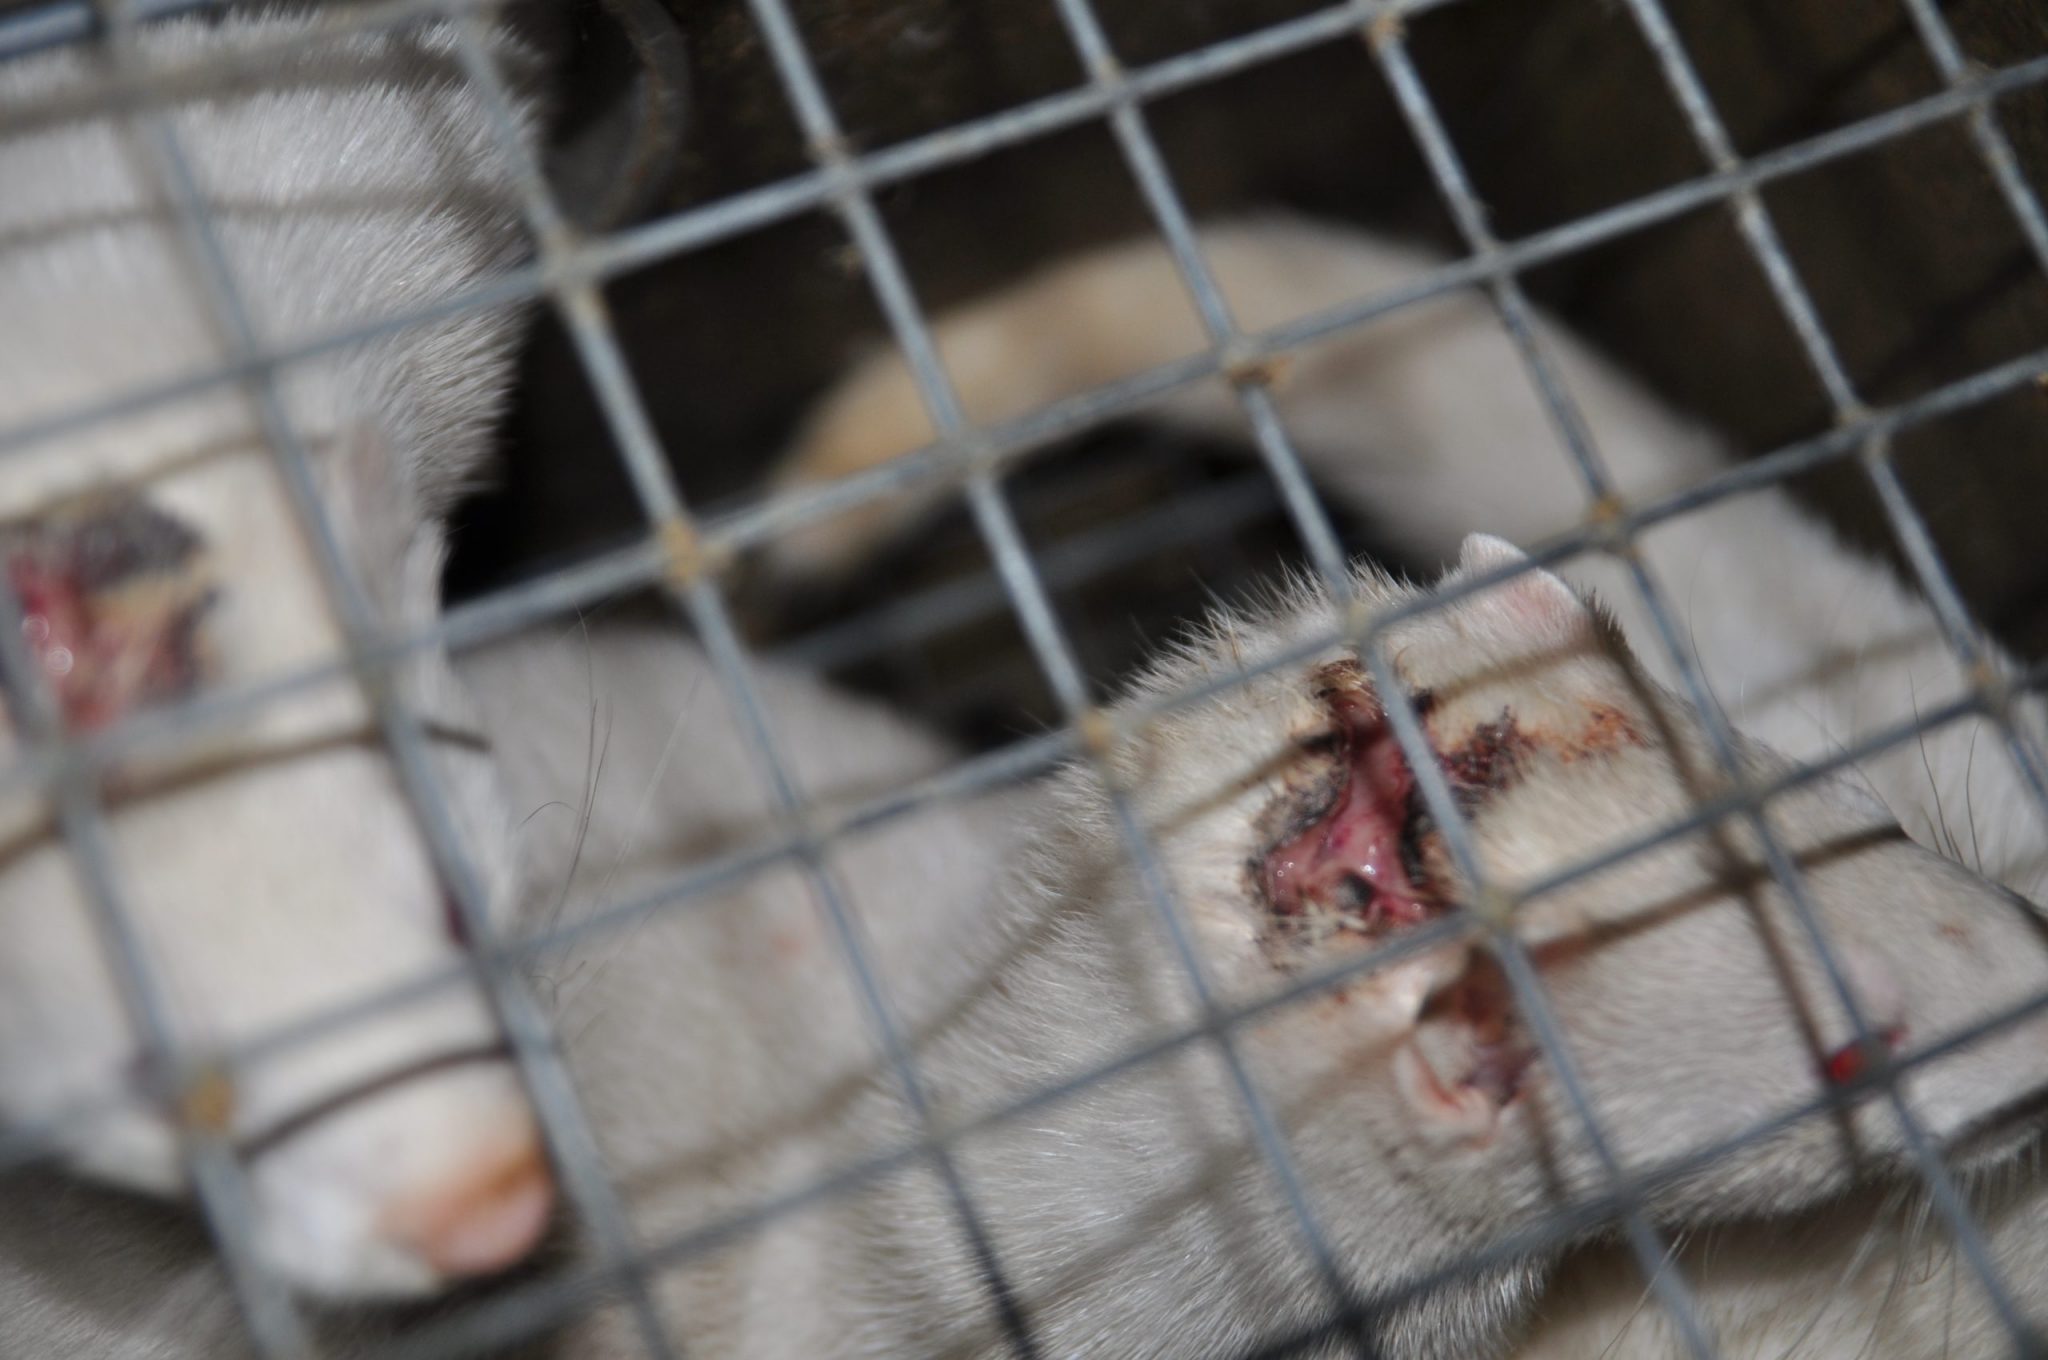 B.1.160 Sars-Cov-2 outbreak in France may have begun on mink farm